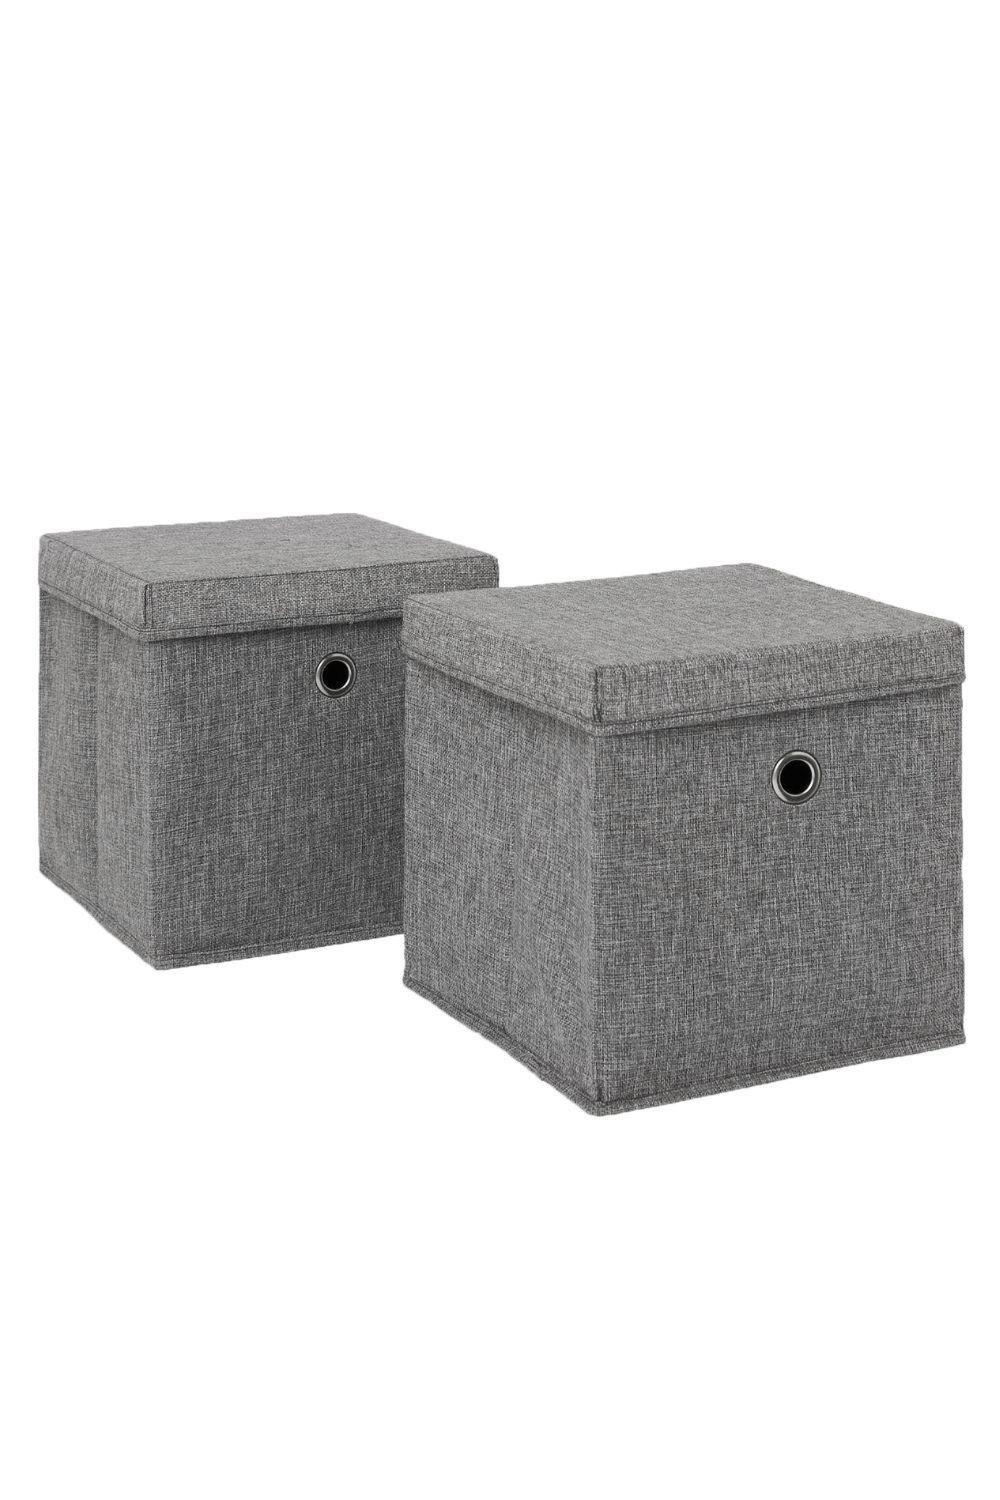 OHS 2 x Fabric Storage Boxes with Lid Foldable Square Organiser|charcoal